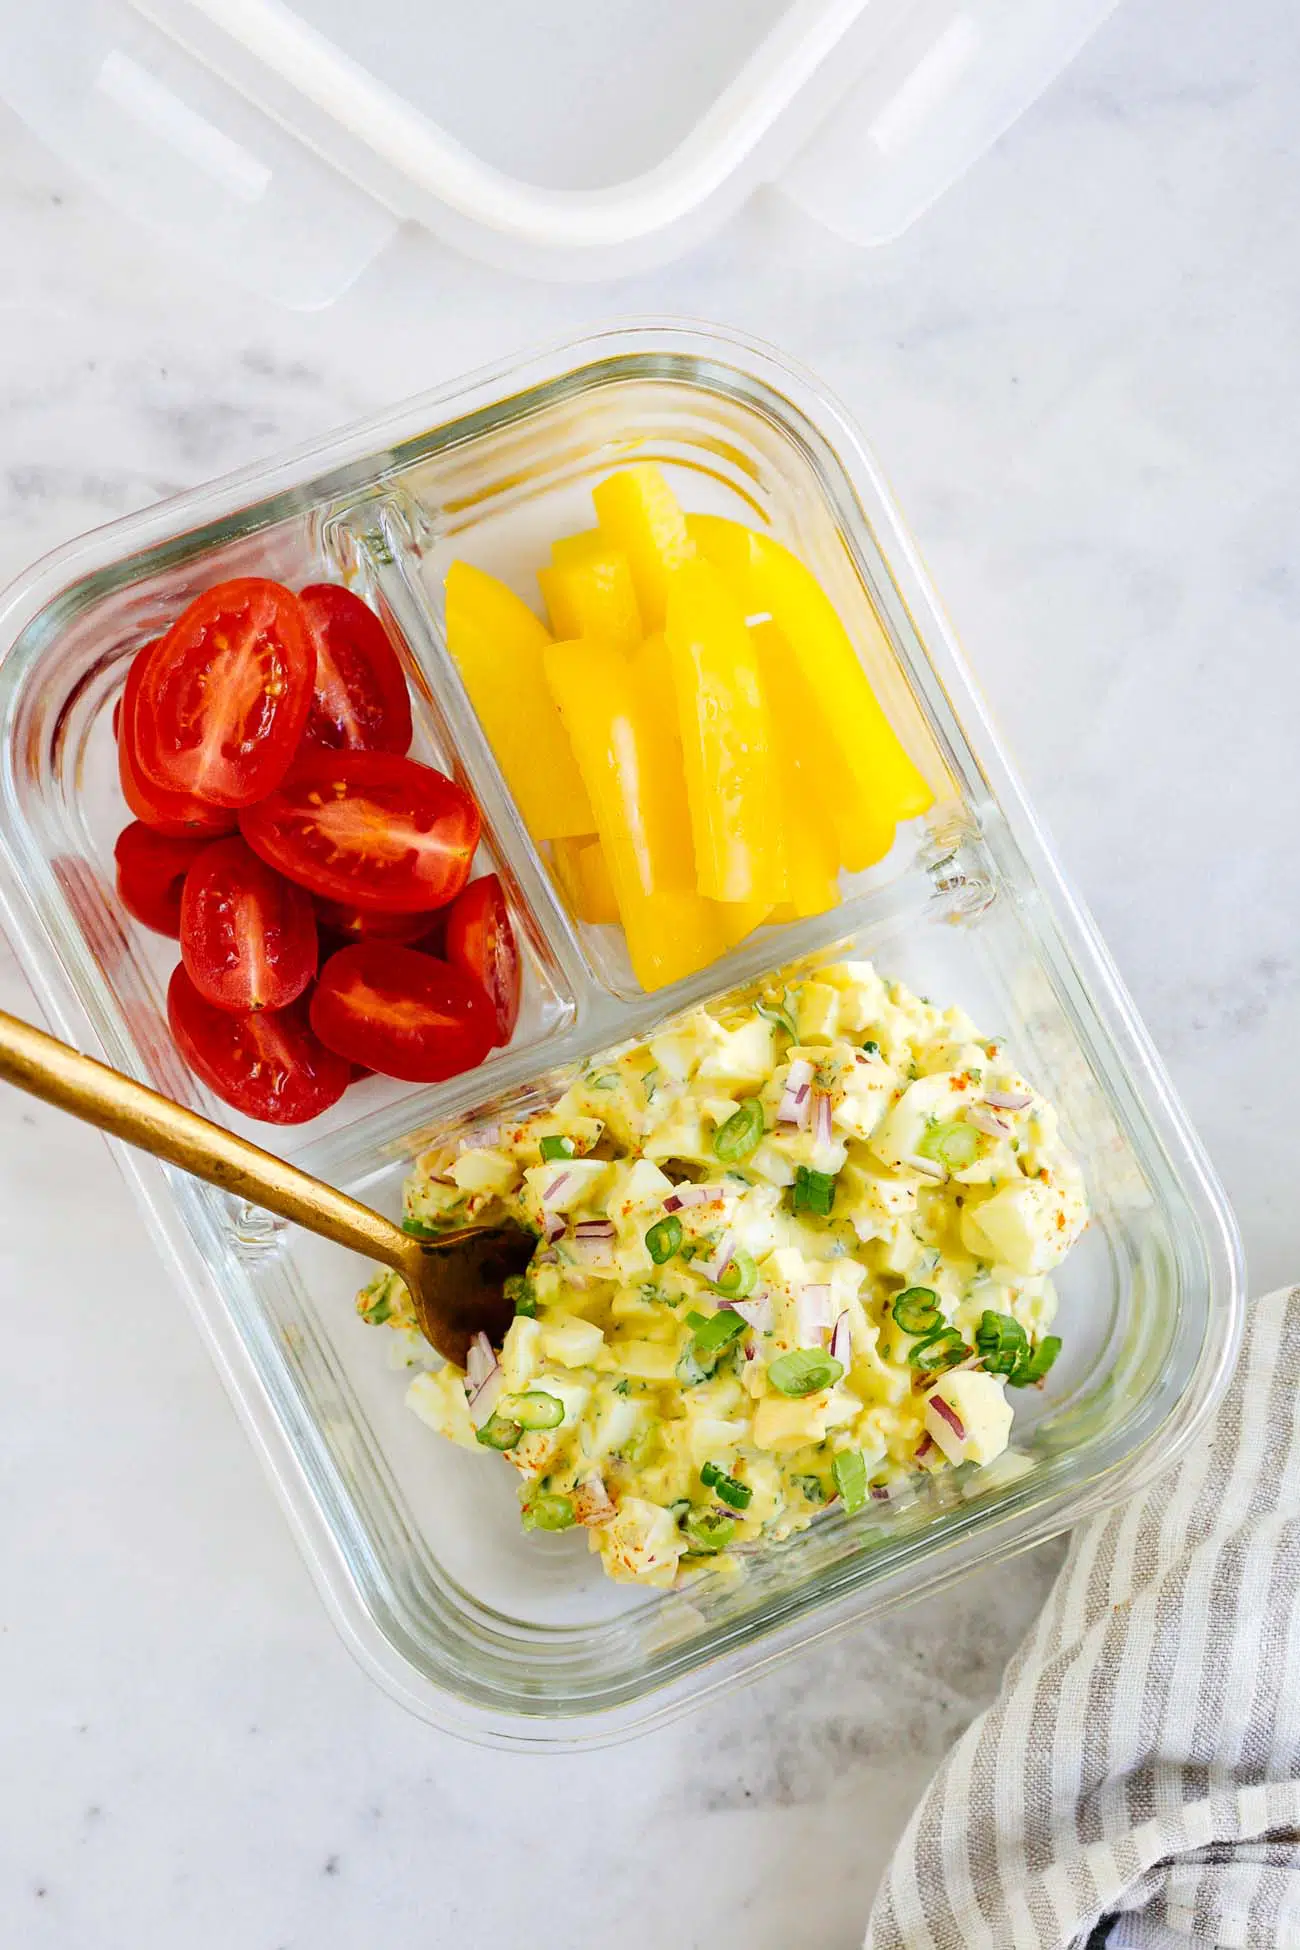 Meal prep container with 3 compartments holding egg salad, cherry tomatoes, and bell peppers.